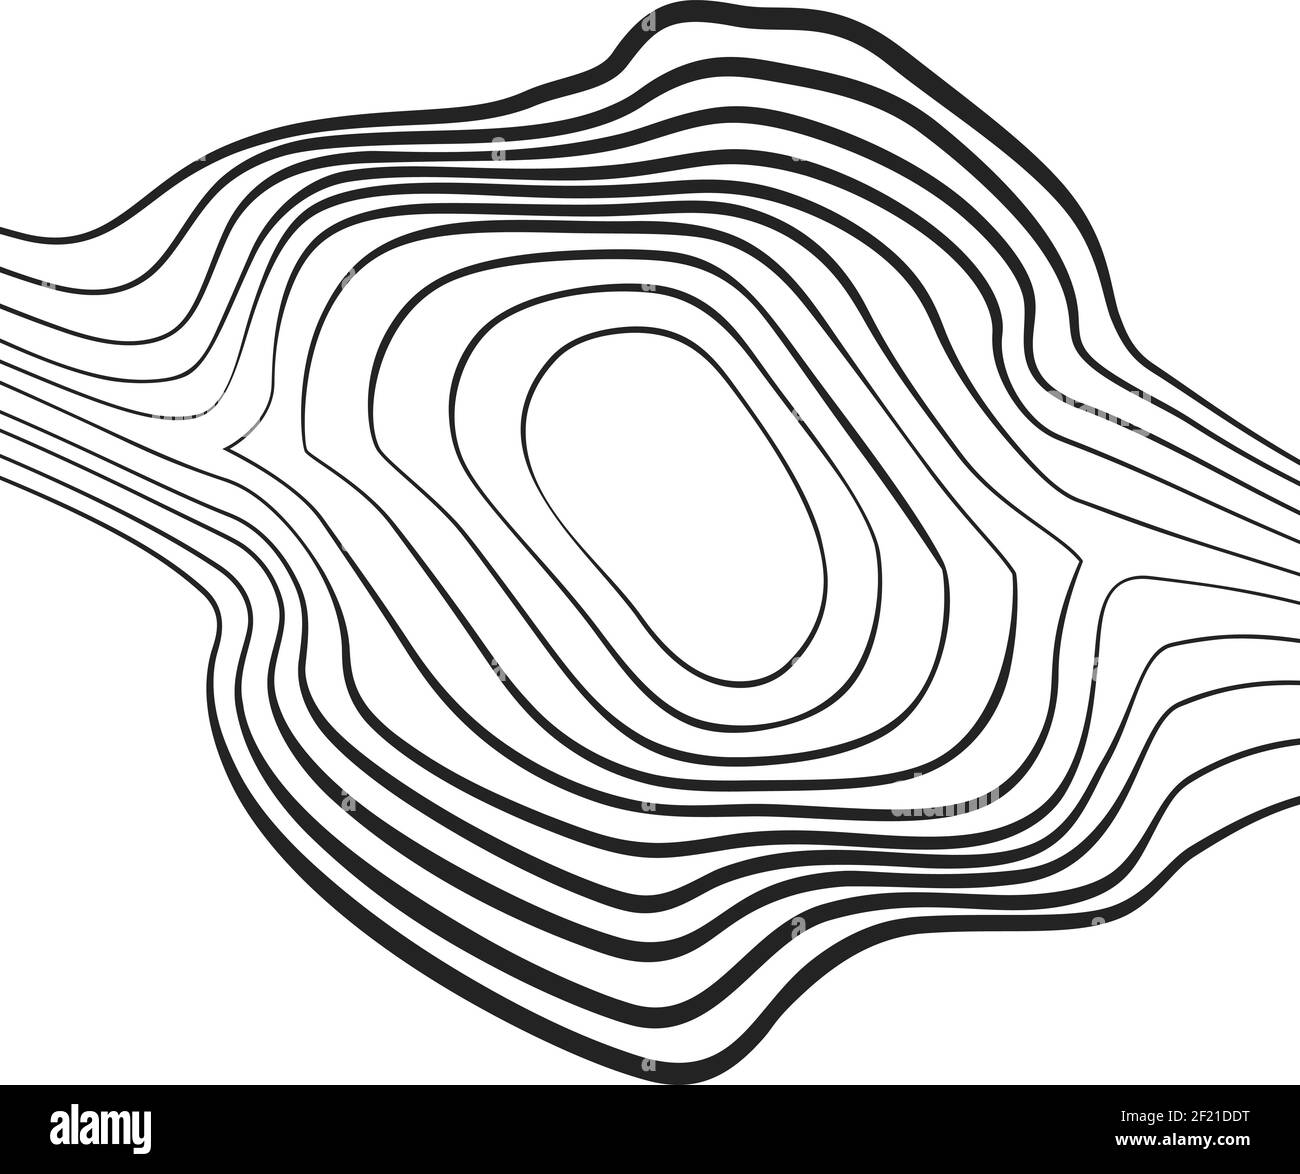 Black curved lines that makes a smooth organic pattern. Abstract